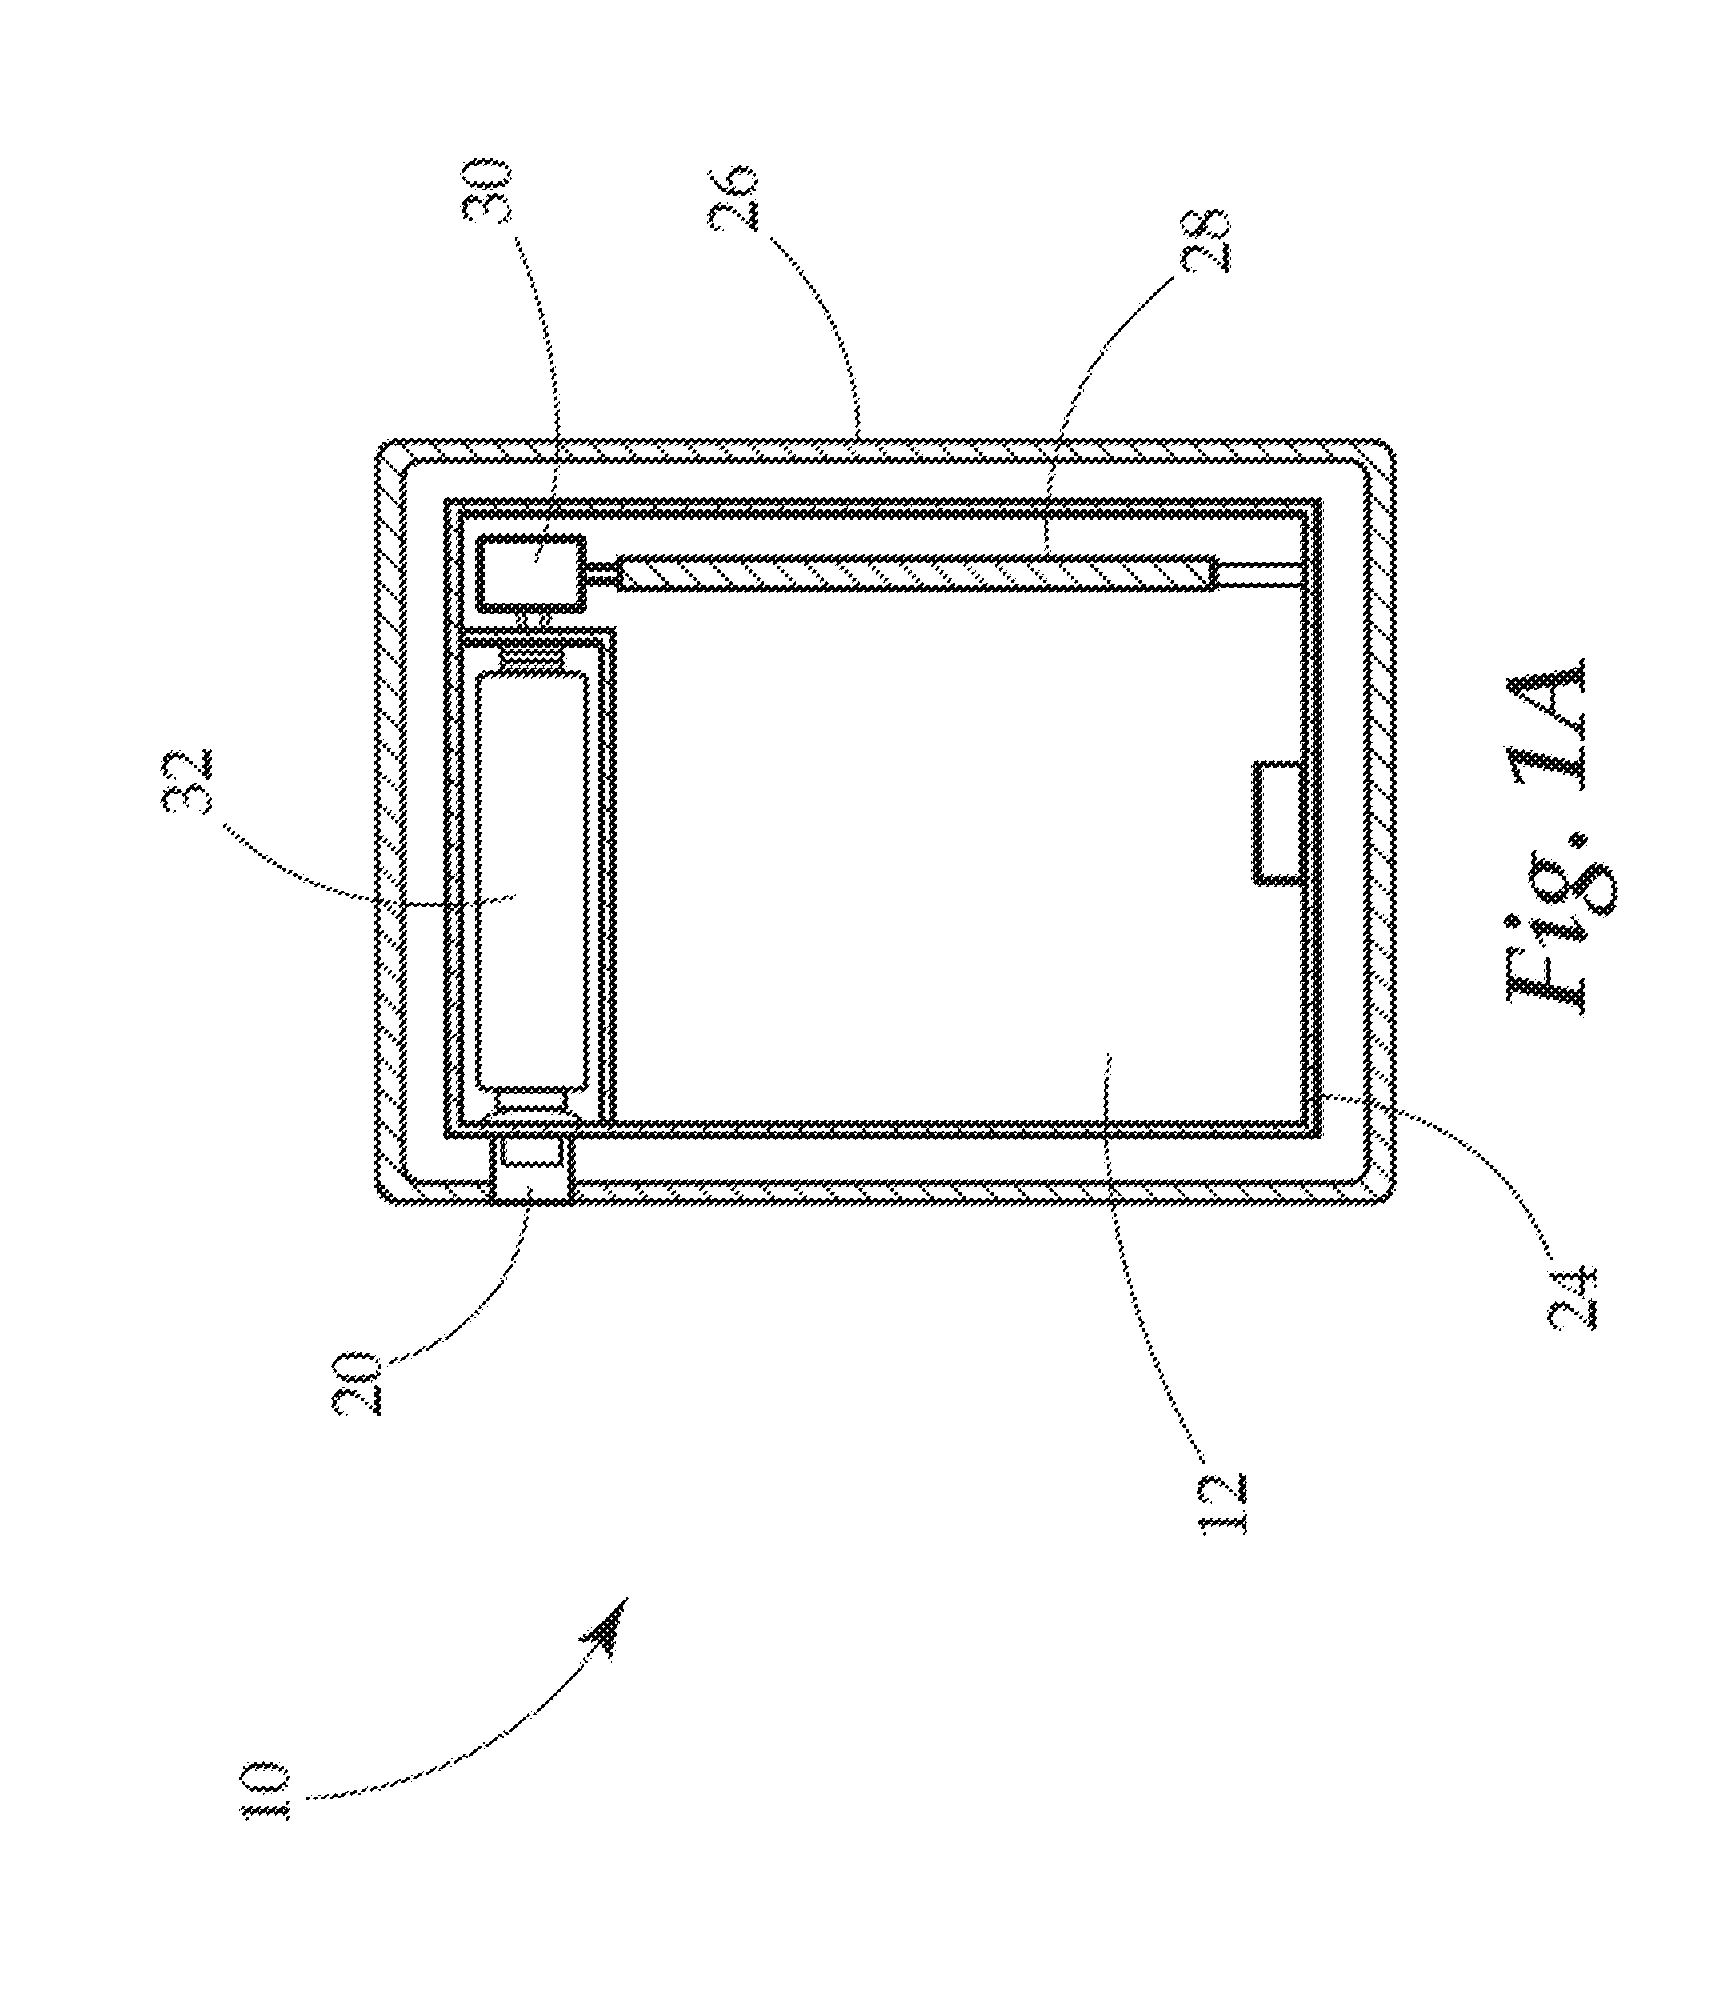 Device and System for the Prevention of an Individual Operating a Vehicle While Impaired